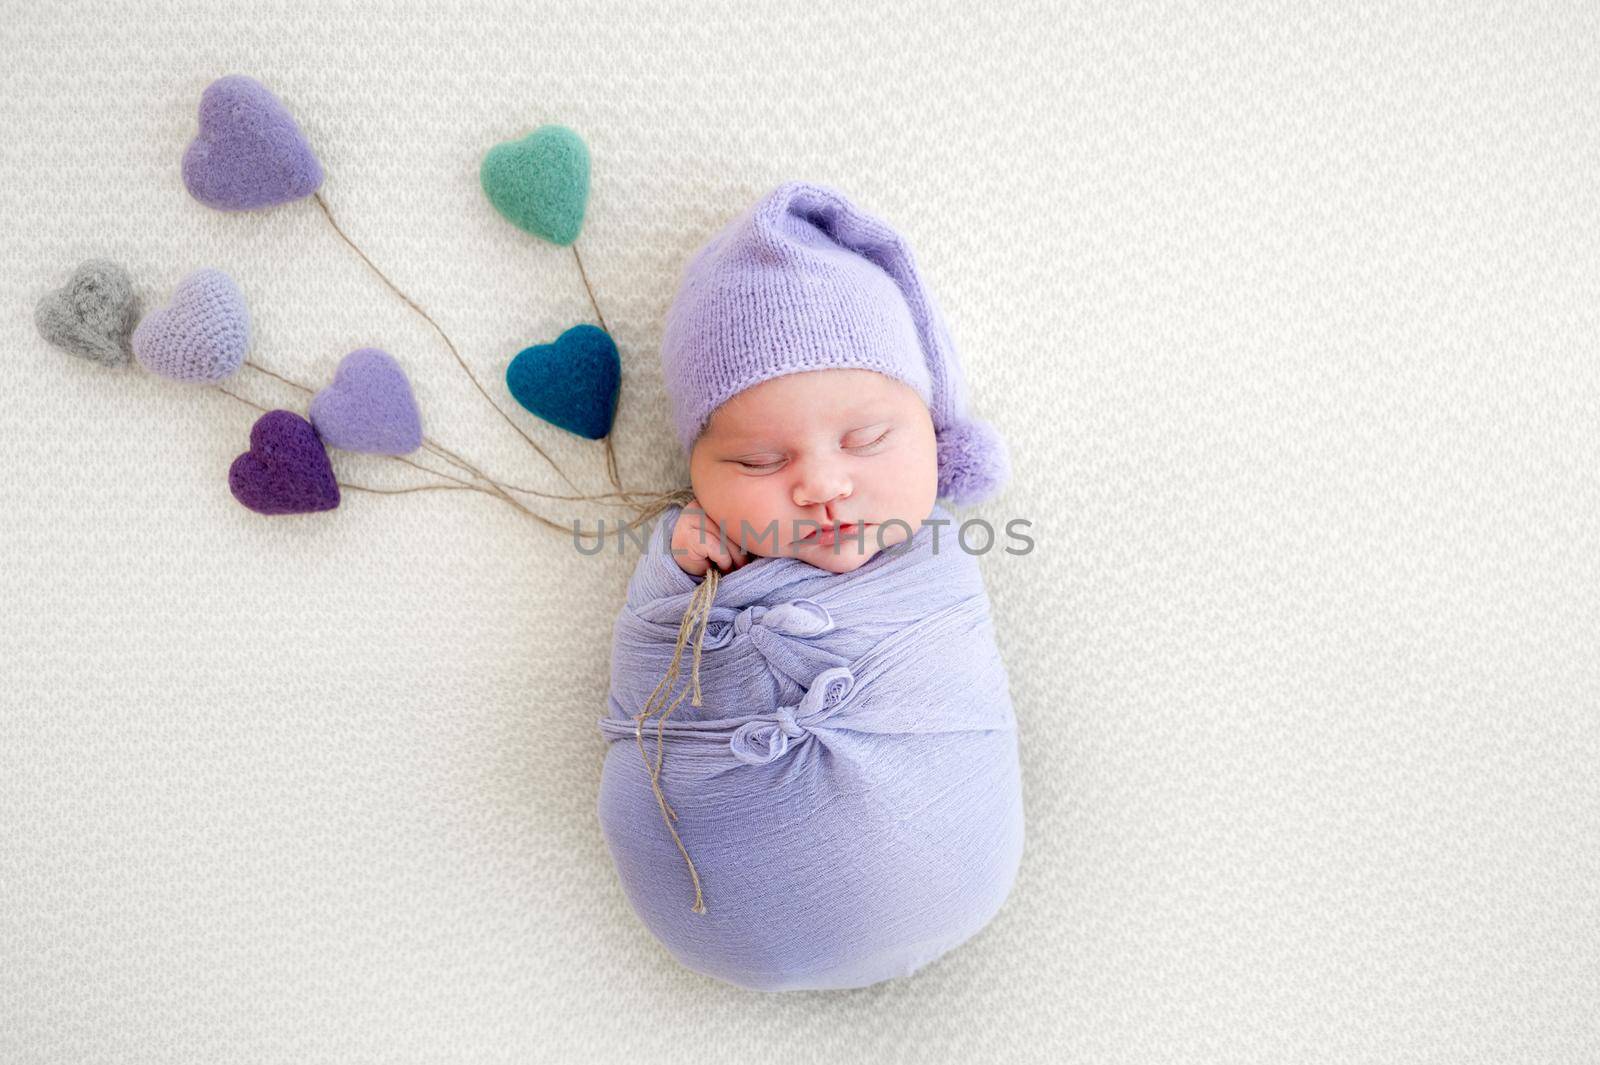 Newborn baby girl swaddled in light blue fabric sleeping and holding in her hands knitted colorful hearts. Little cute infant child napping in beautiful composition. Adorable kid wearing hat resting